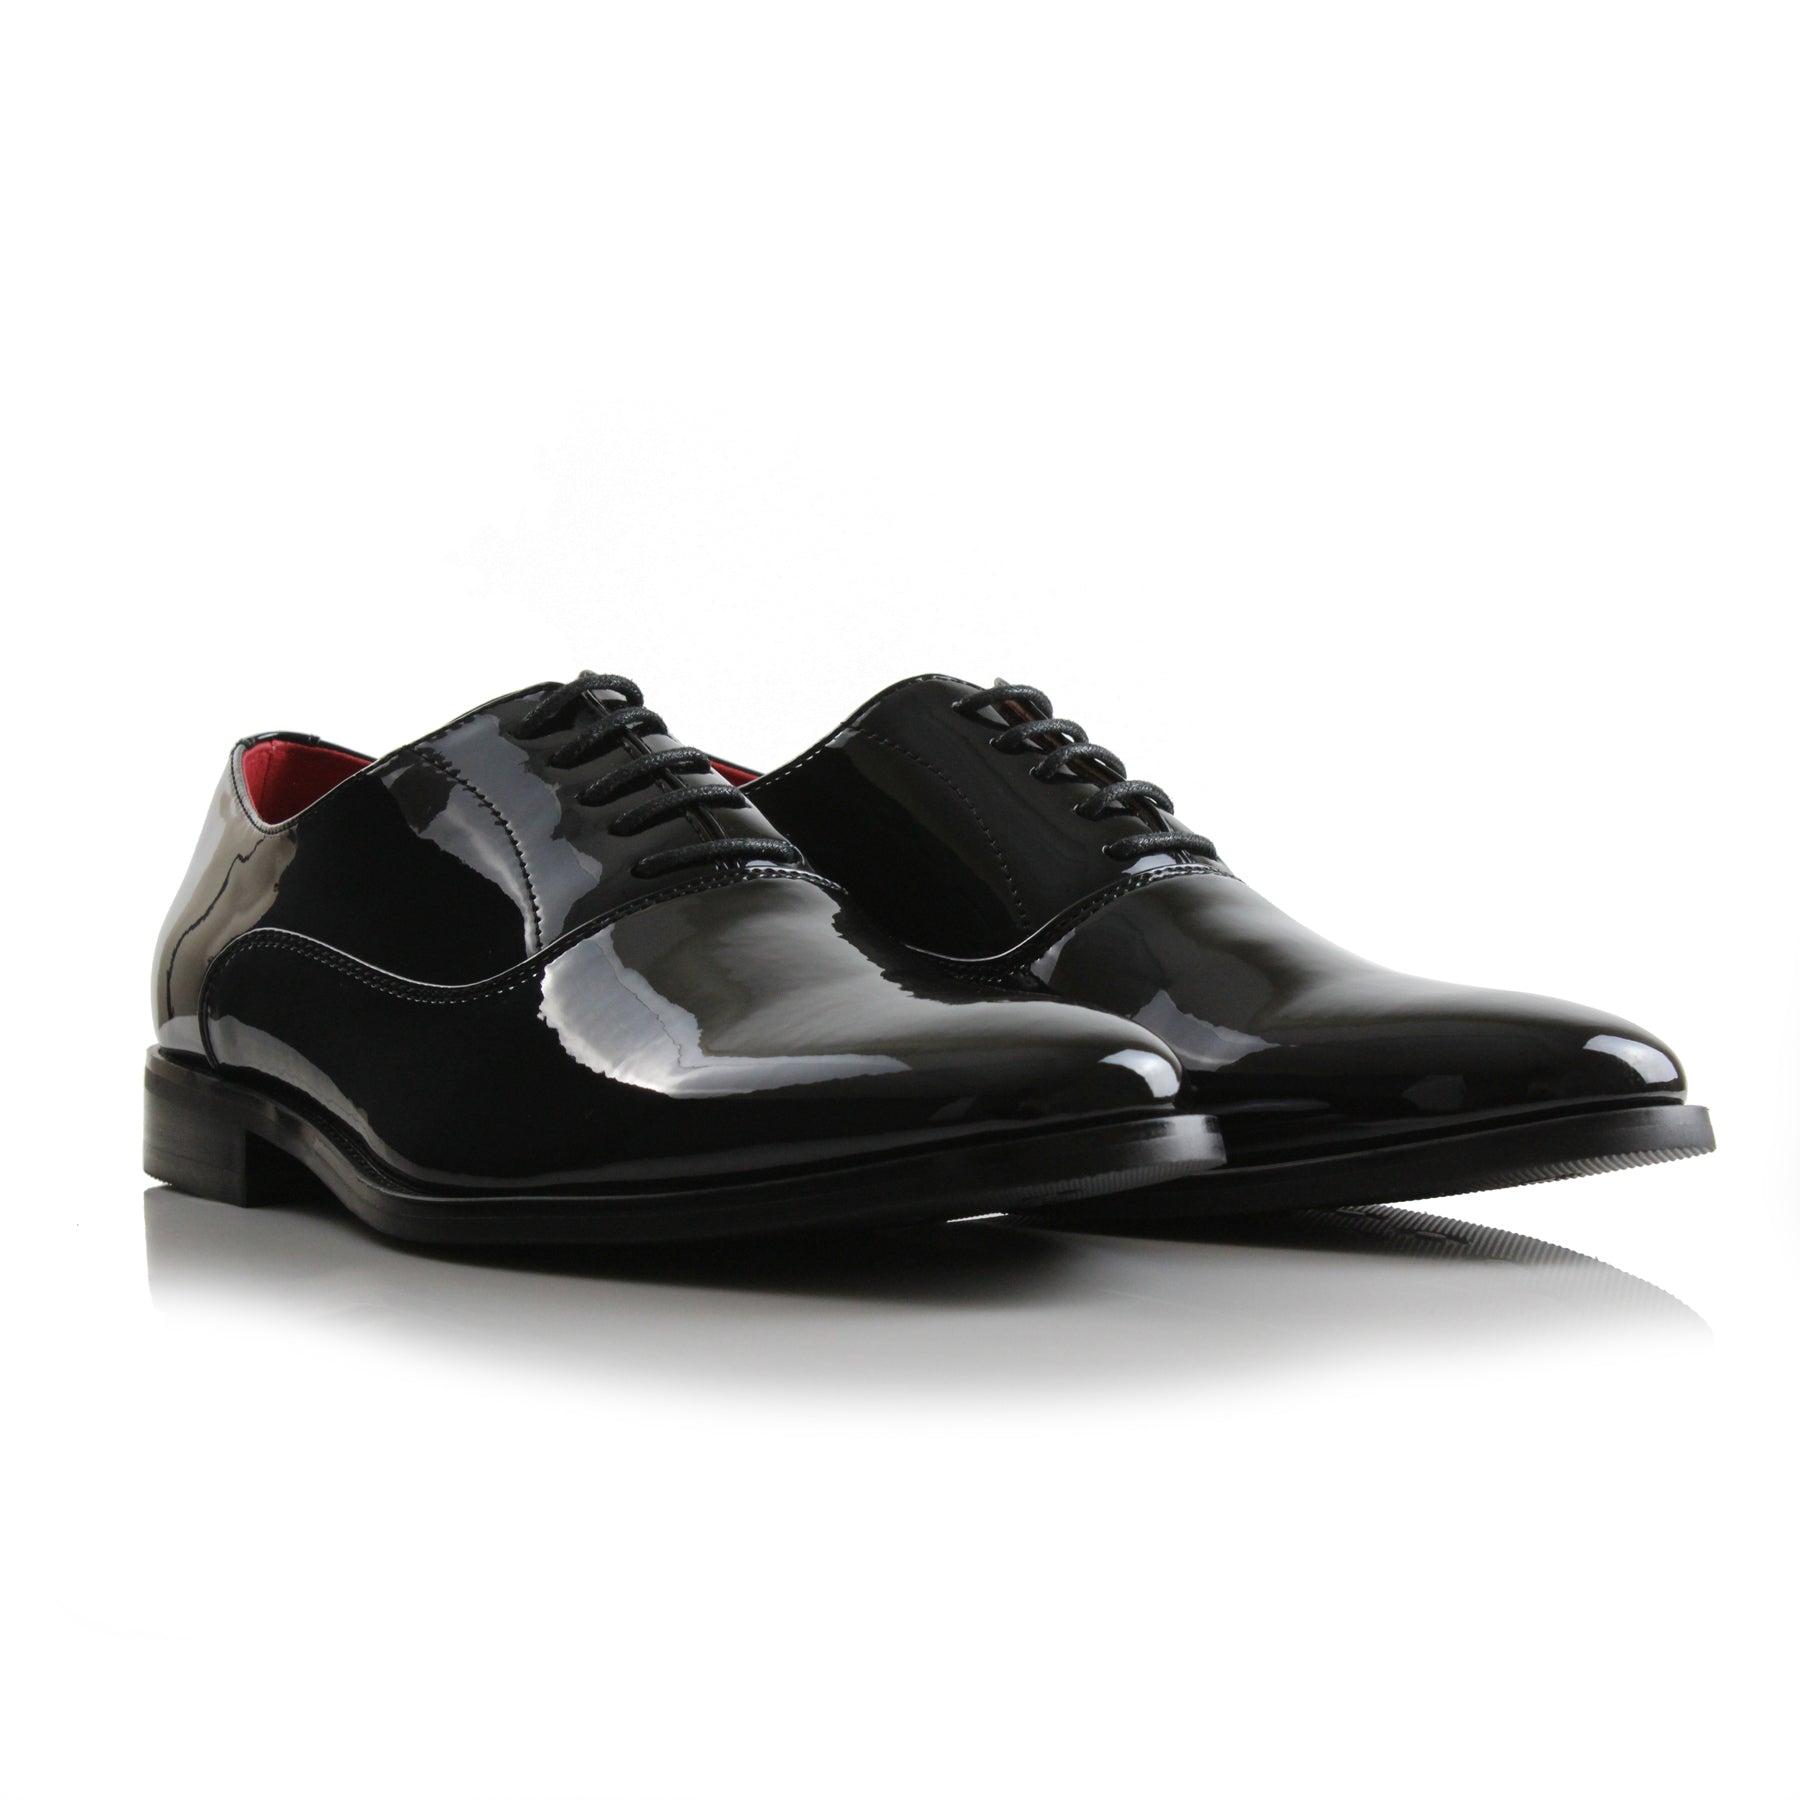 Faux Patent Leather Oxfords | George by Ferro Aldo | Conal Footwear | Paired Angle View